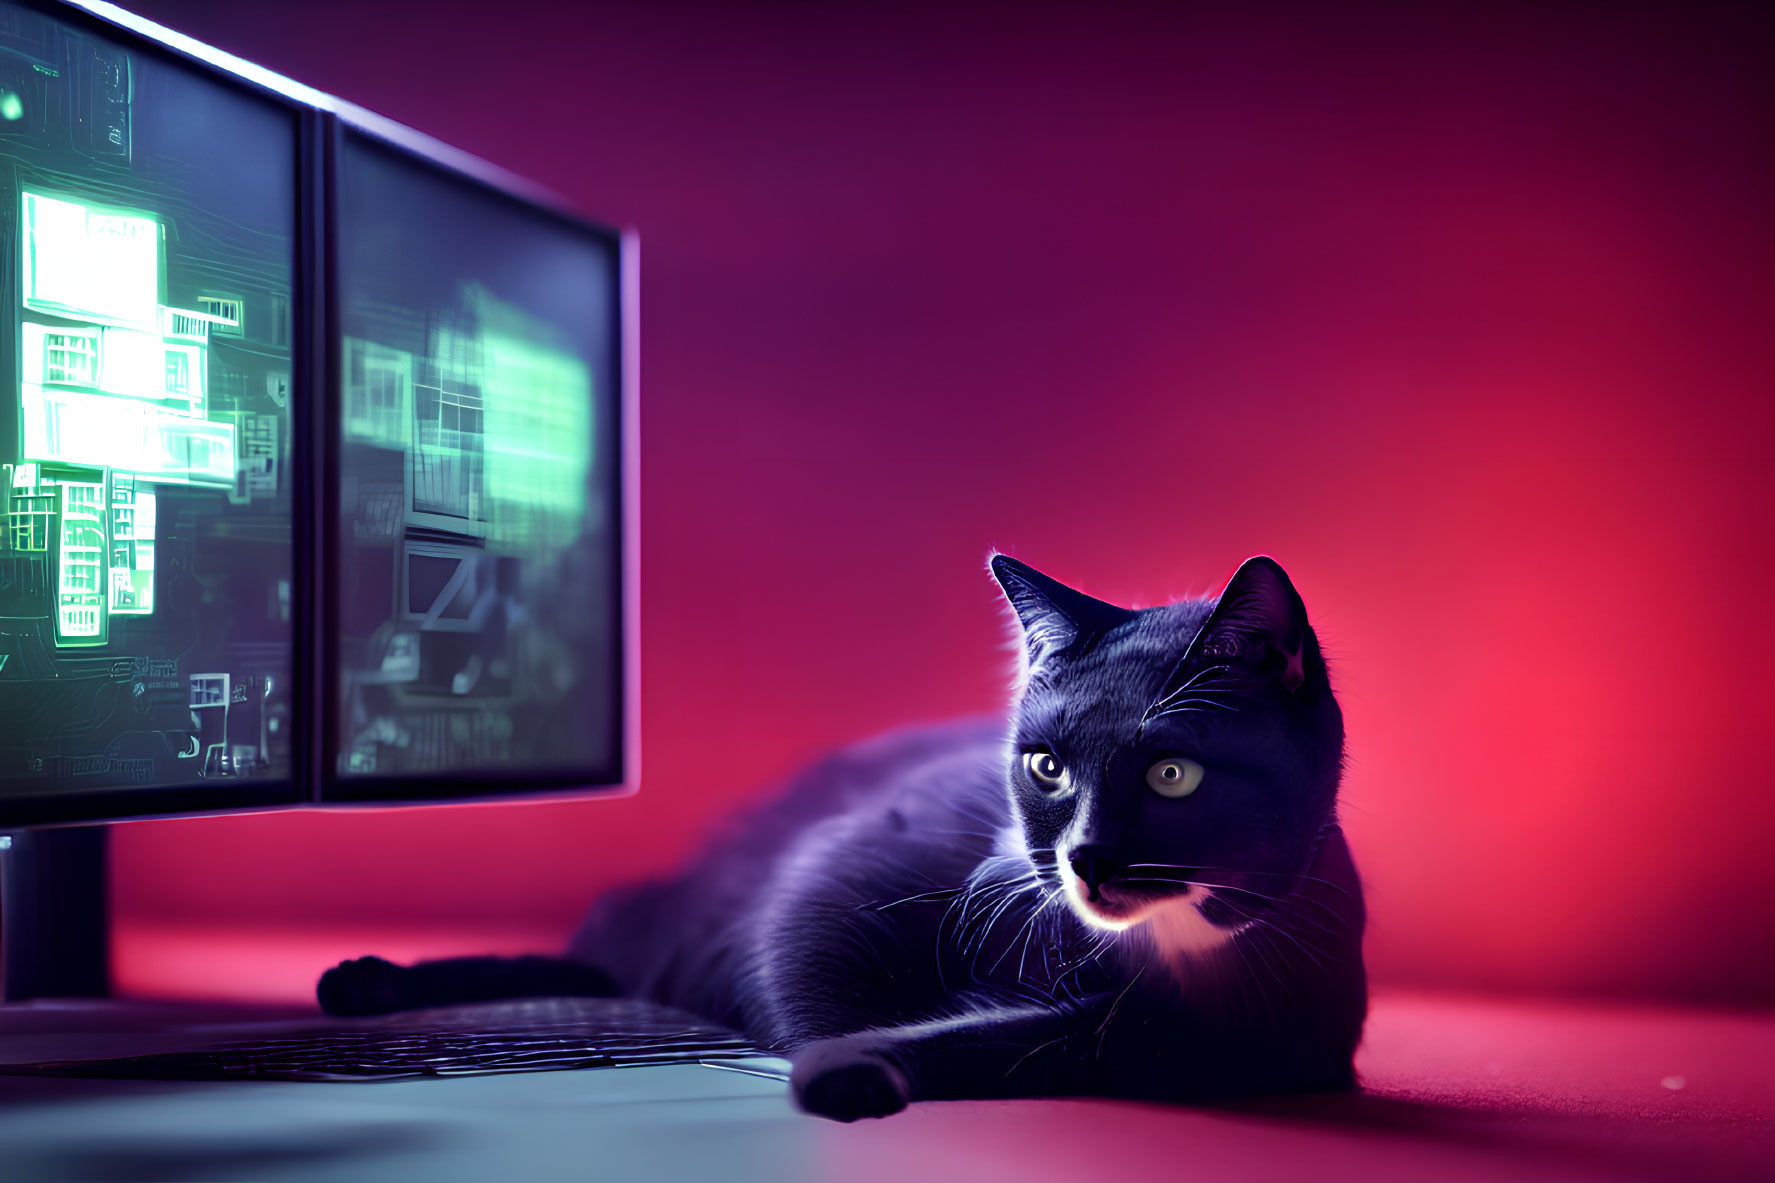 Black cat lounging in front of computer monitor with neon light and graphs